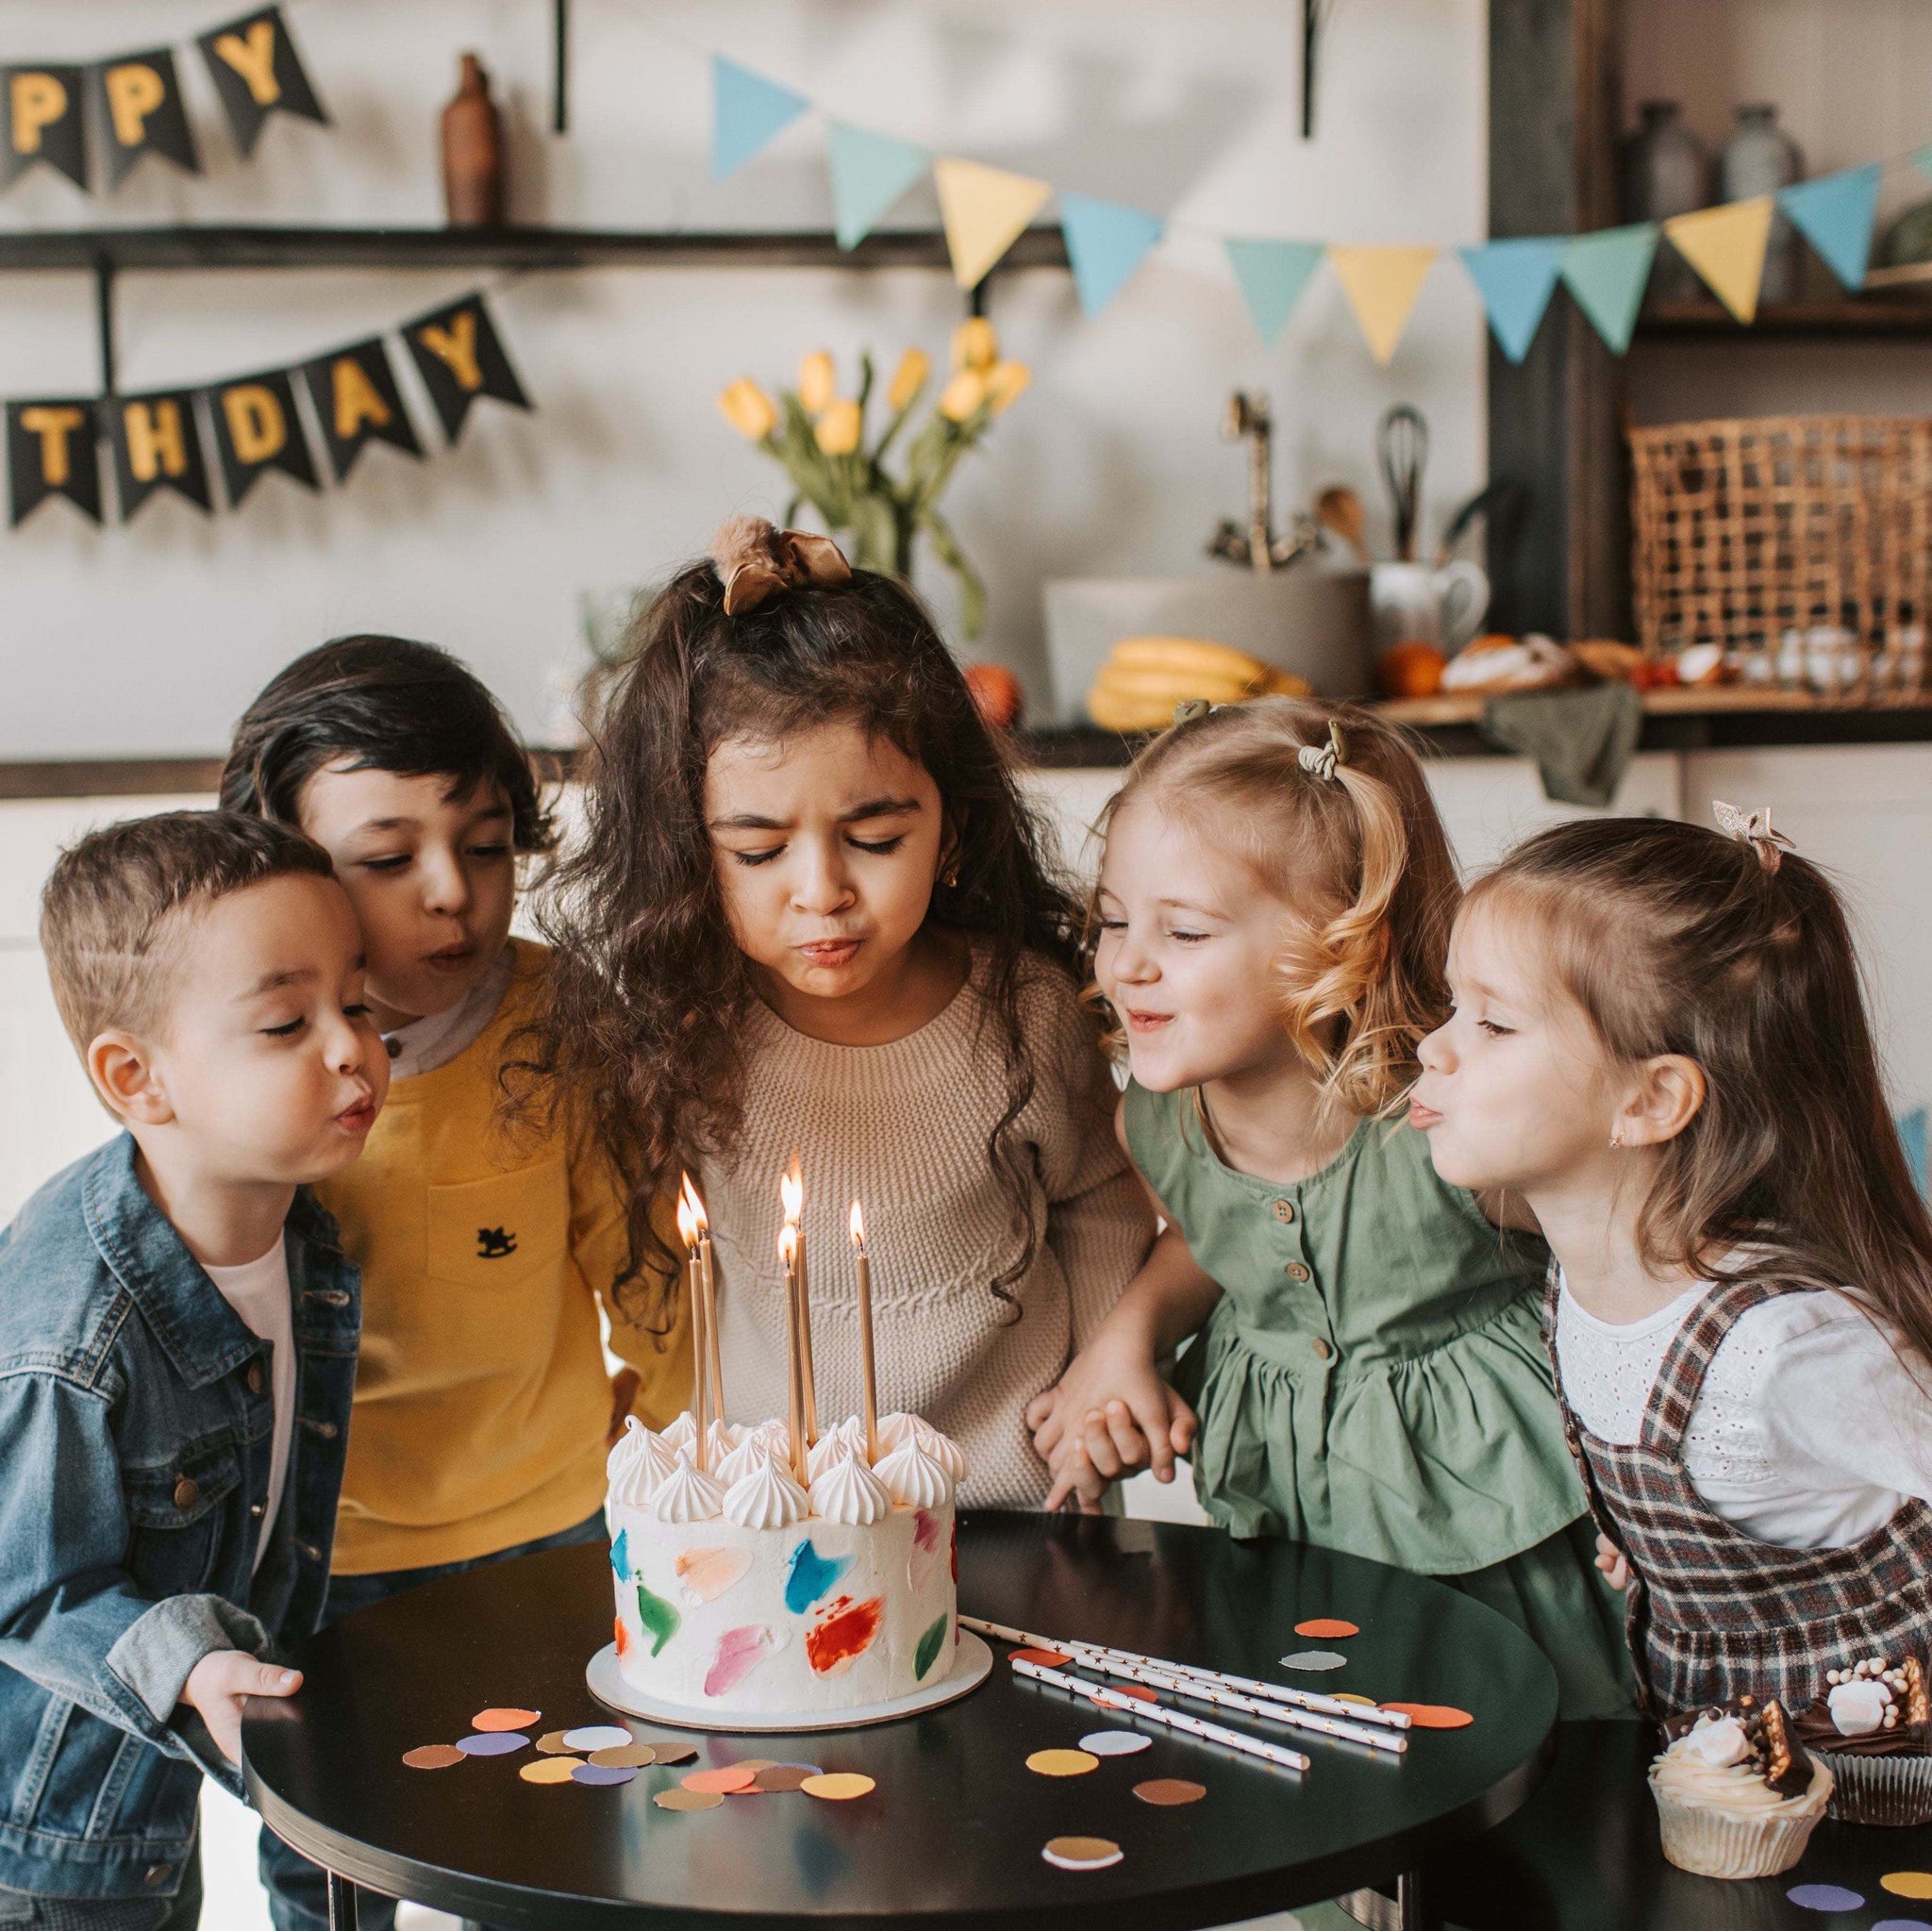 7 Ways to Host an Eco-friendly Kids Party